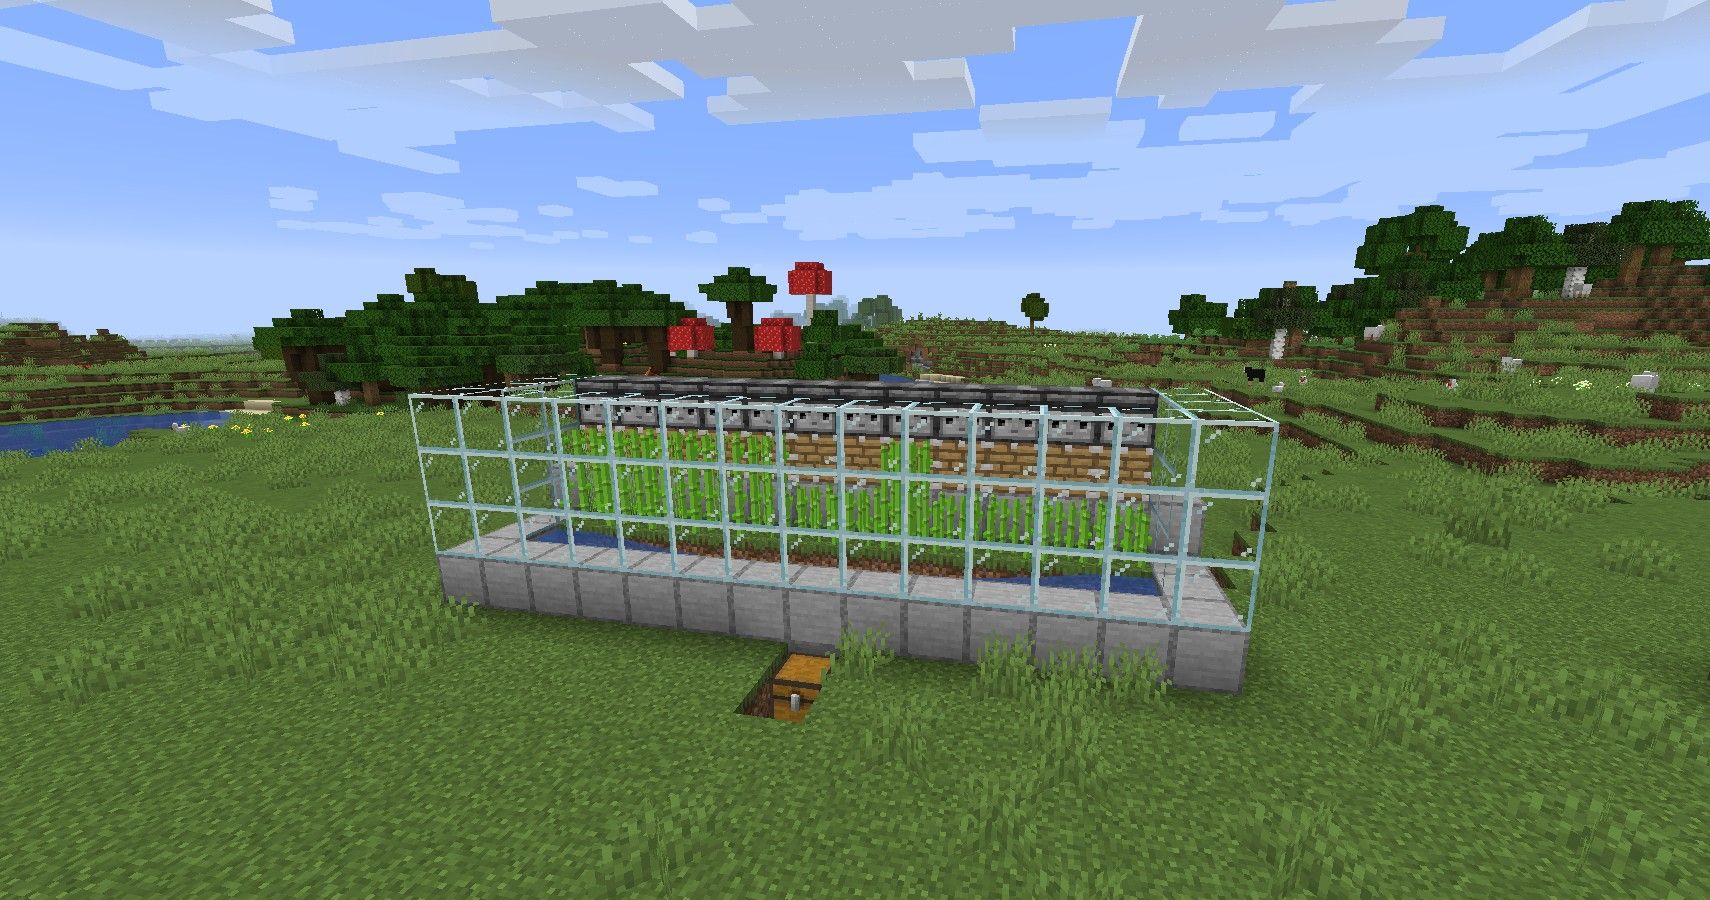 Expanded Minecraft Auto-Sugarcane farm, double the length of guide version